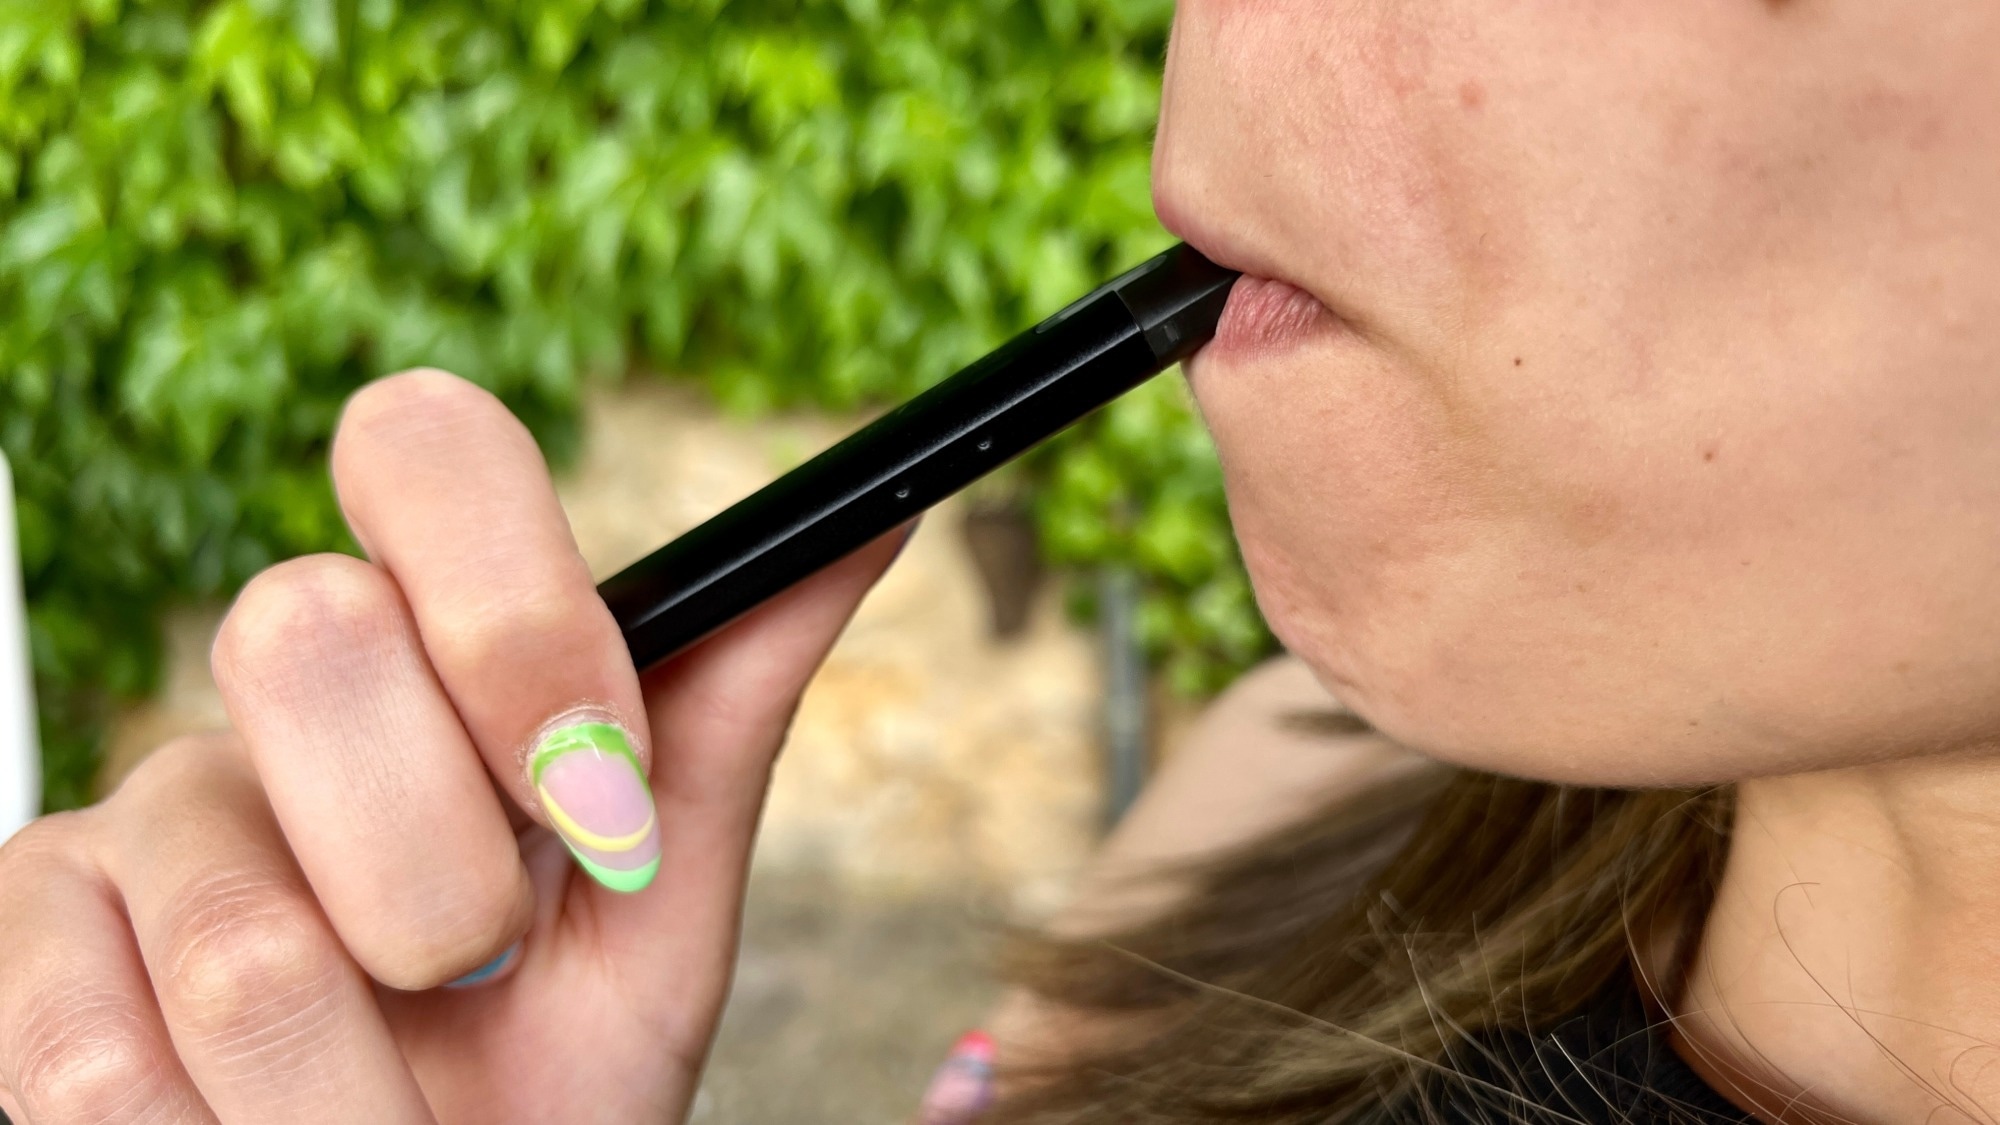 Study: E-cigarette attitudes and use in a sample of Australians aged 15–30 years. Image Credit: Powerlightss / Shutterstock